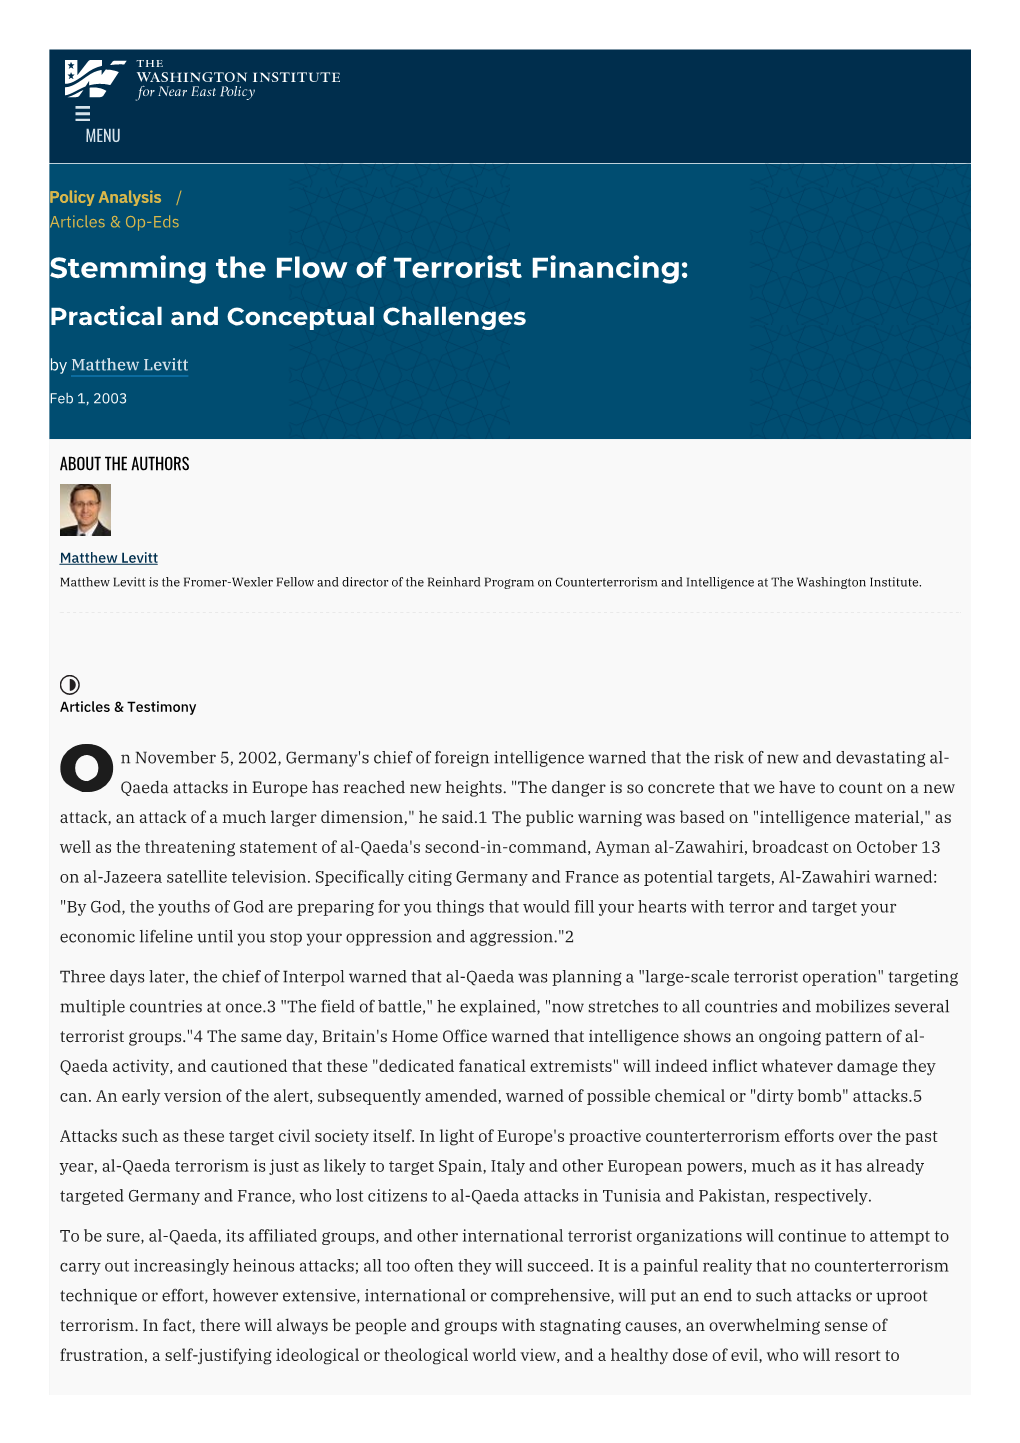 Stemming the Flow of Terrorist Financing: Practical and Conceptual Challenges by Matthew Levitt